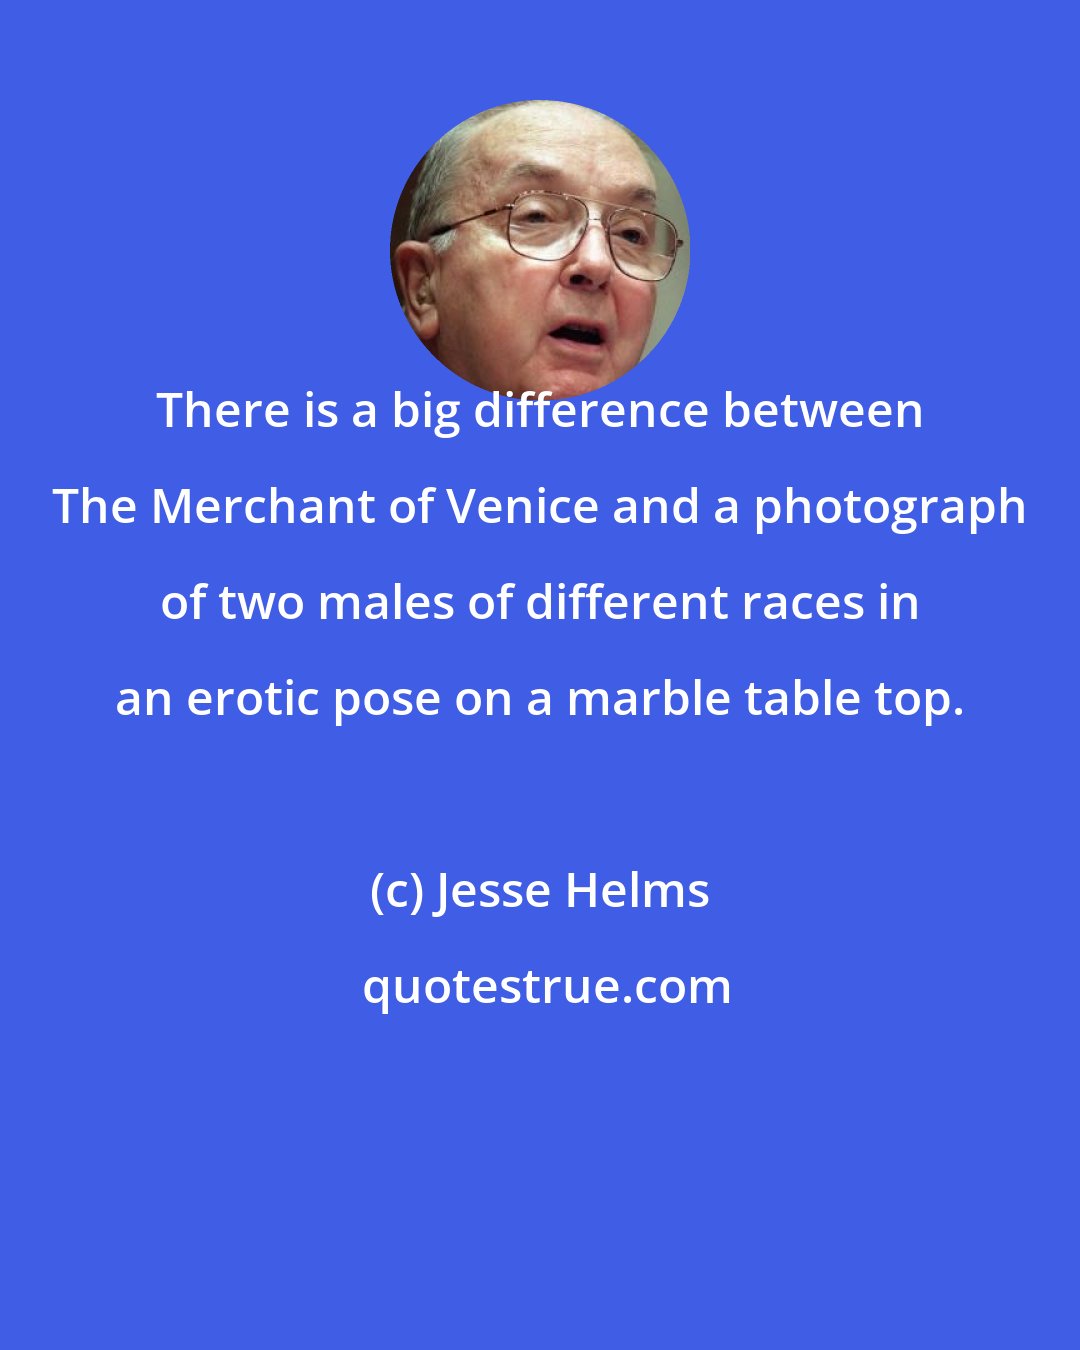 Jesse Helms: There is a big difference between The Merchant of Venice and a photograph of two males of different races in an erotic pose on a marble table top.